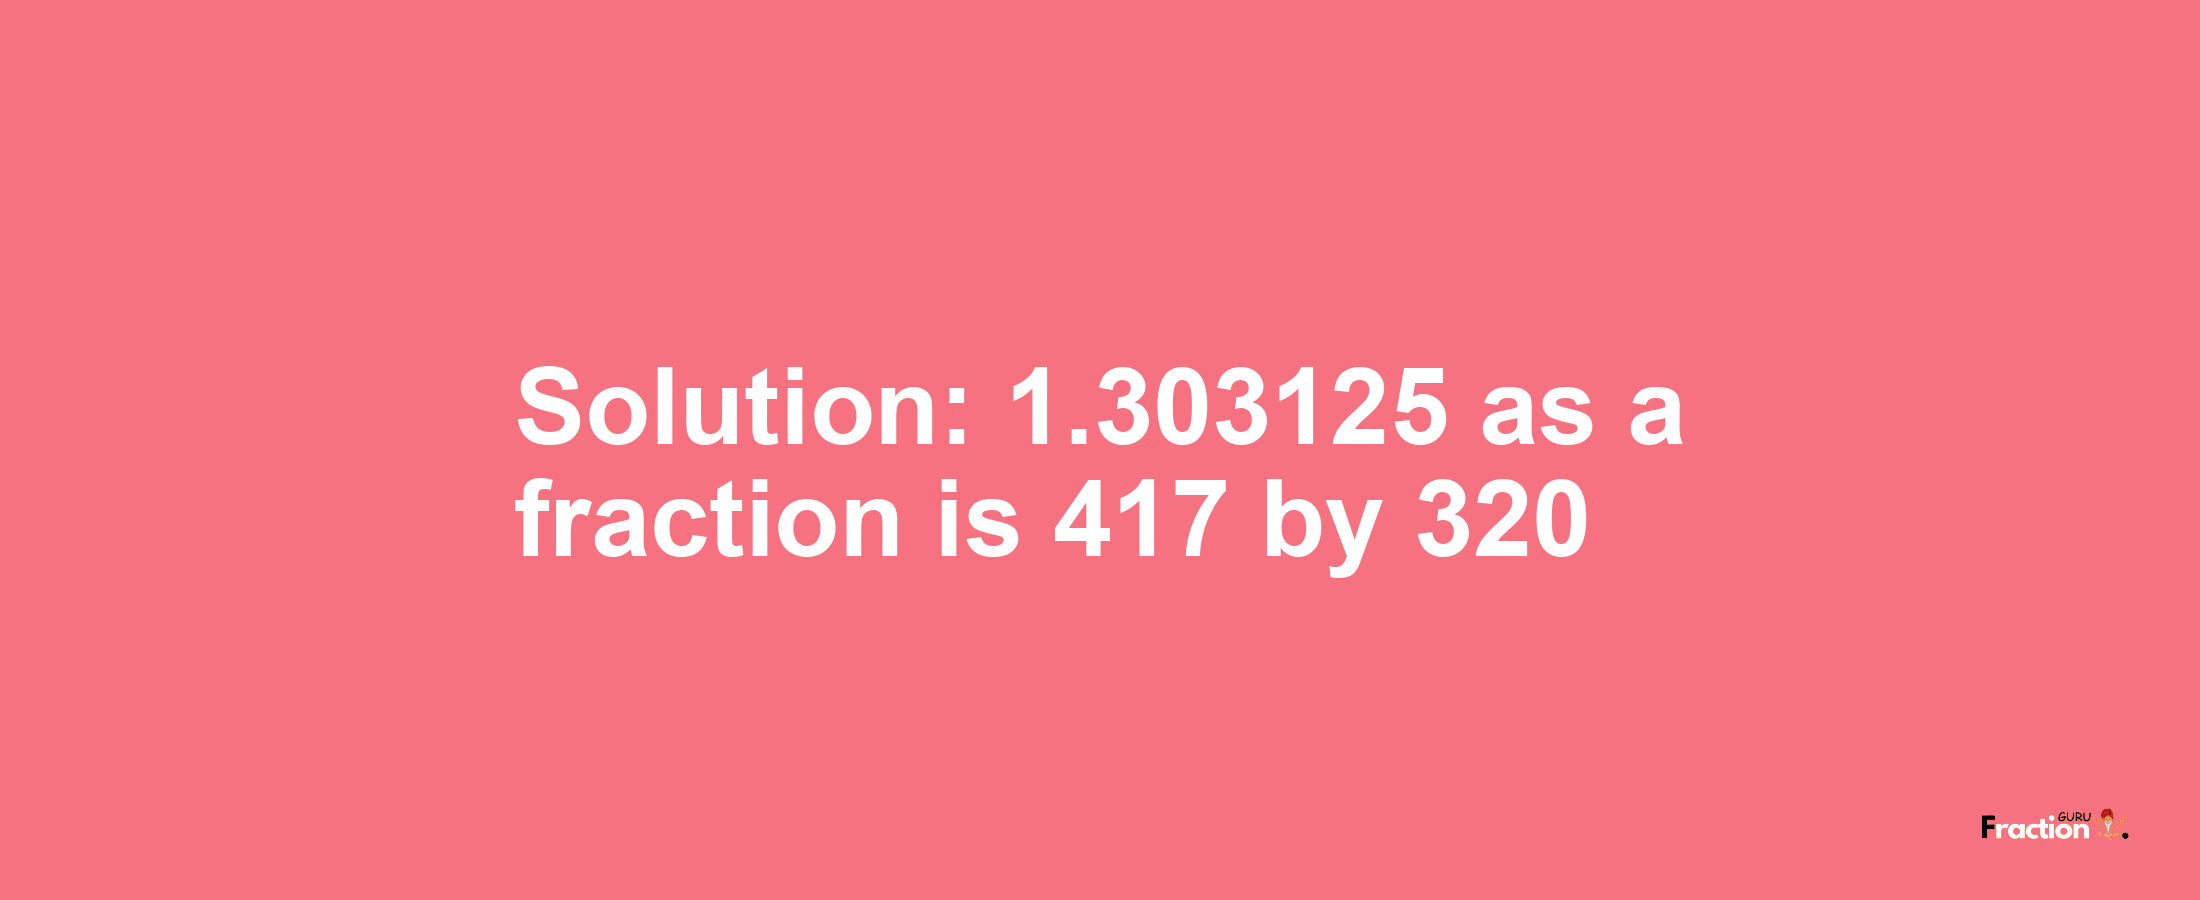 Solution:1.303125 as a fraction is 417/320